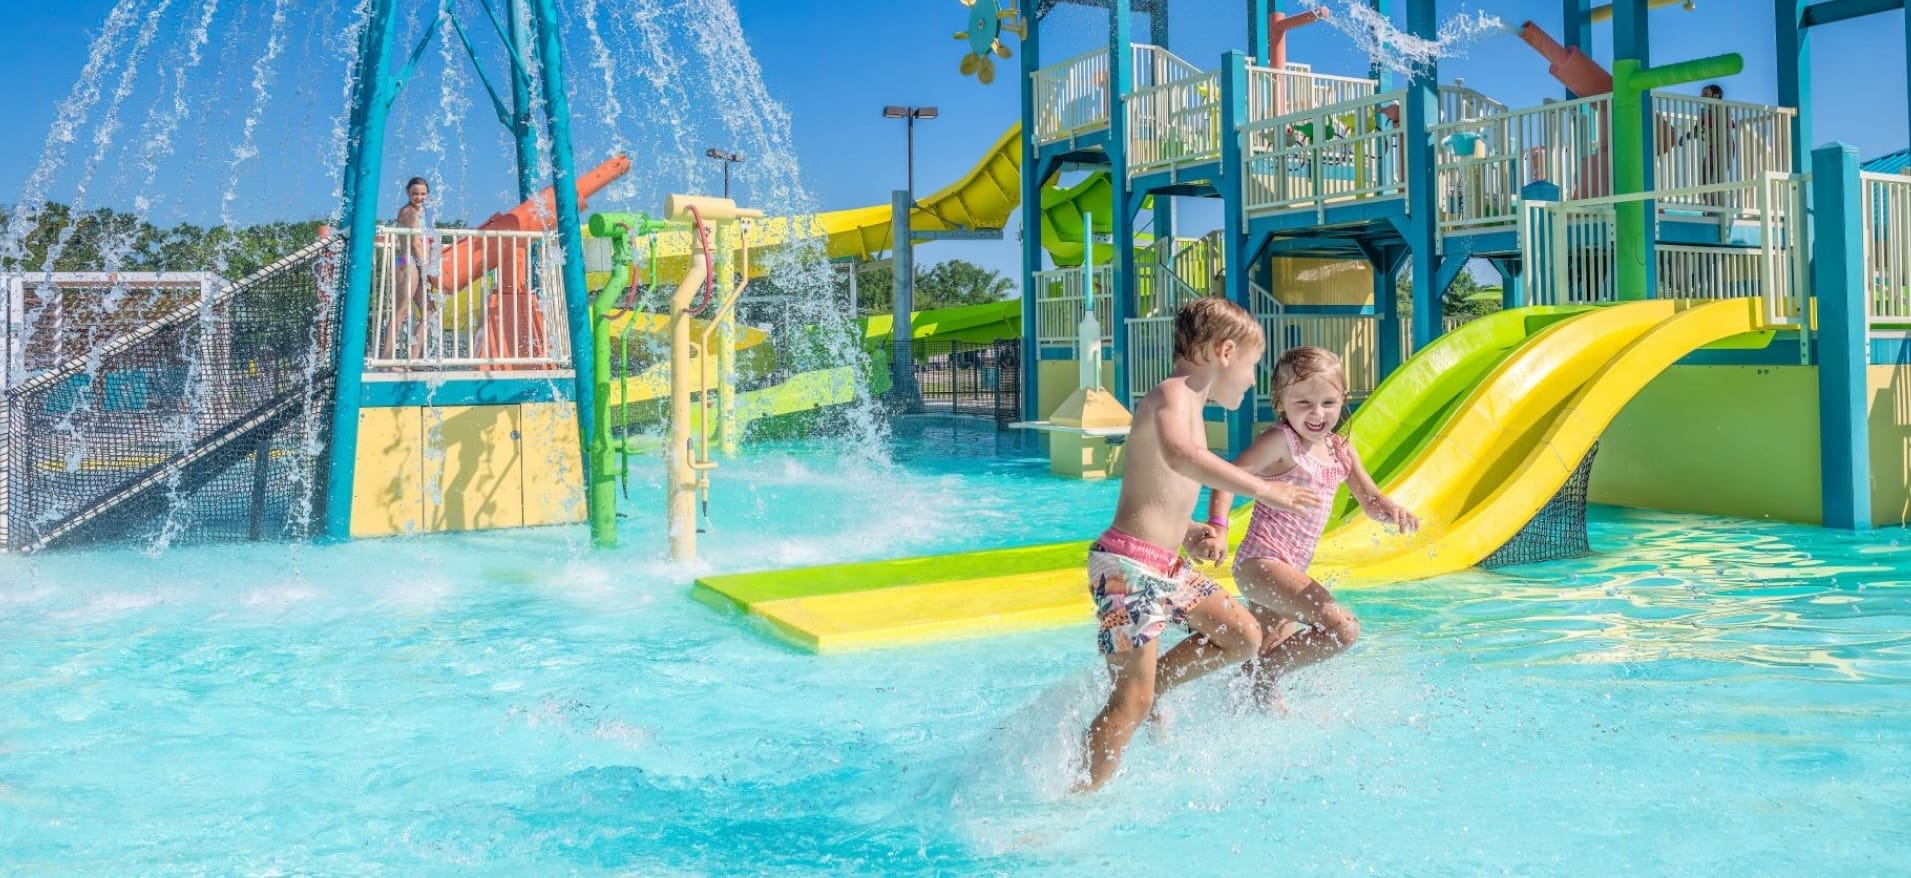 A boy and girl playing at a water play park